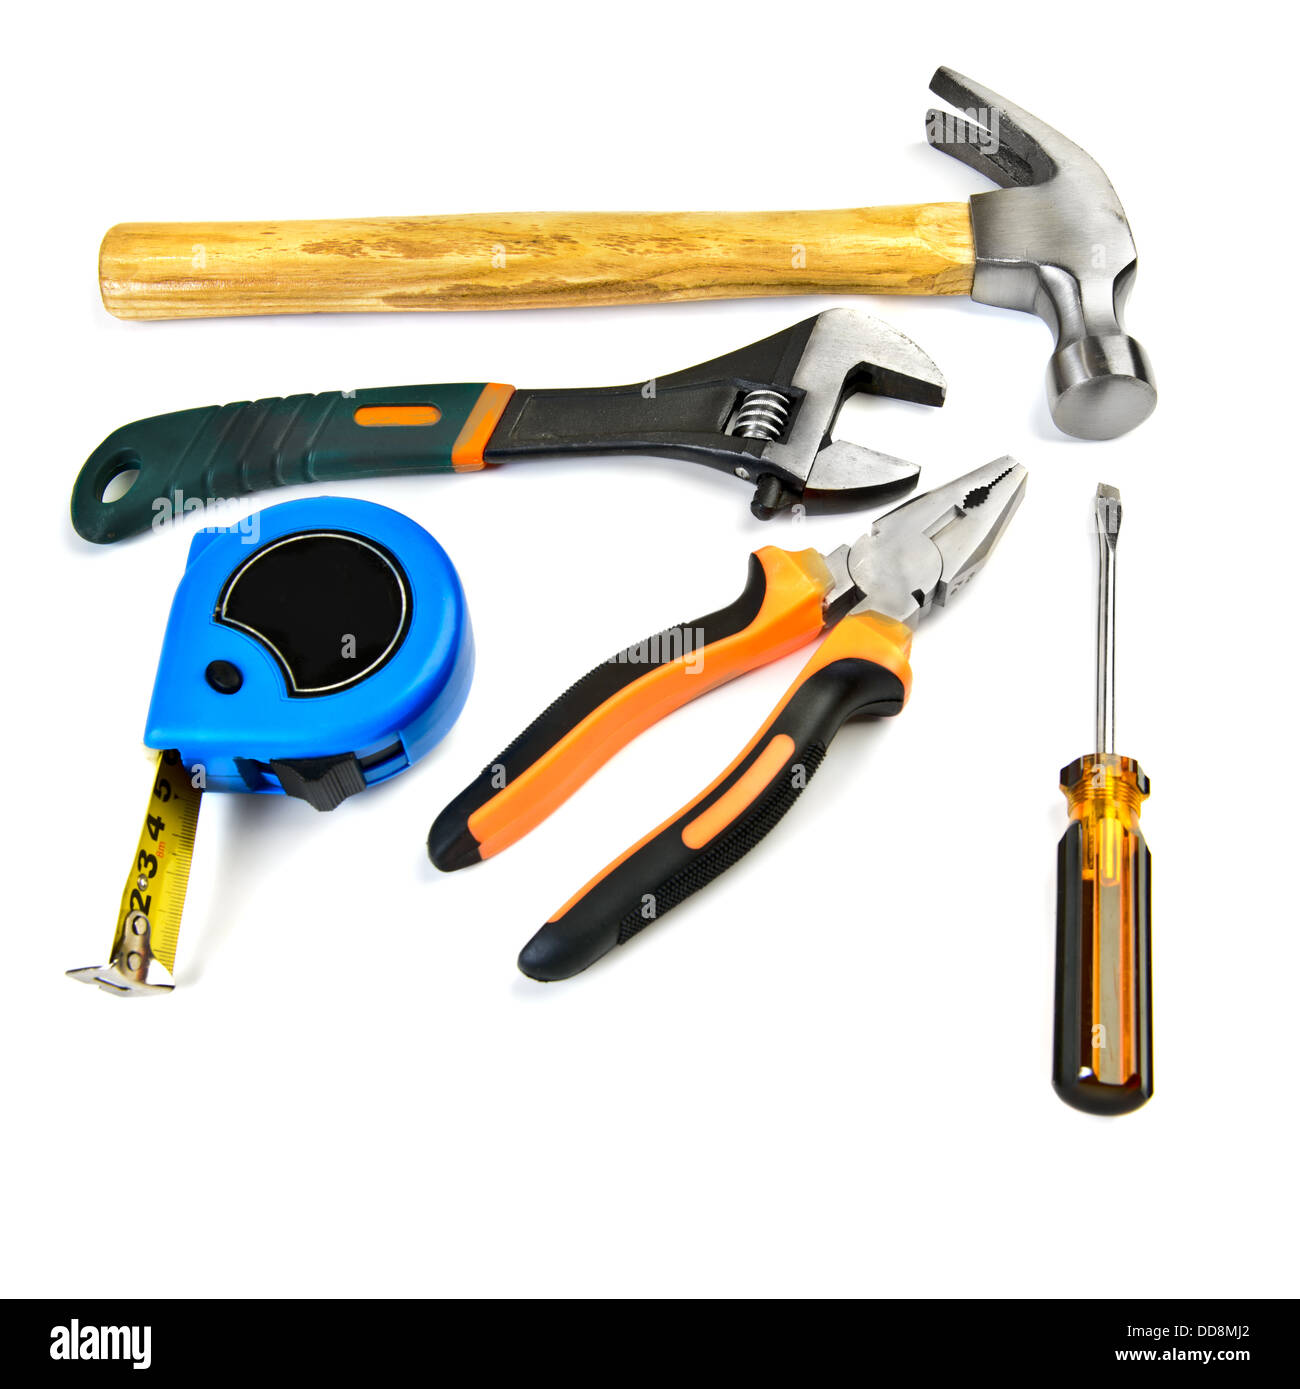 Hammer, pliers, wrench, screwdriver and tape measure isolated over white background Stock Photo